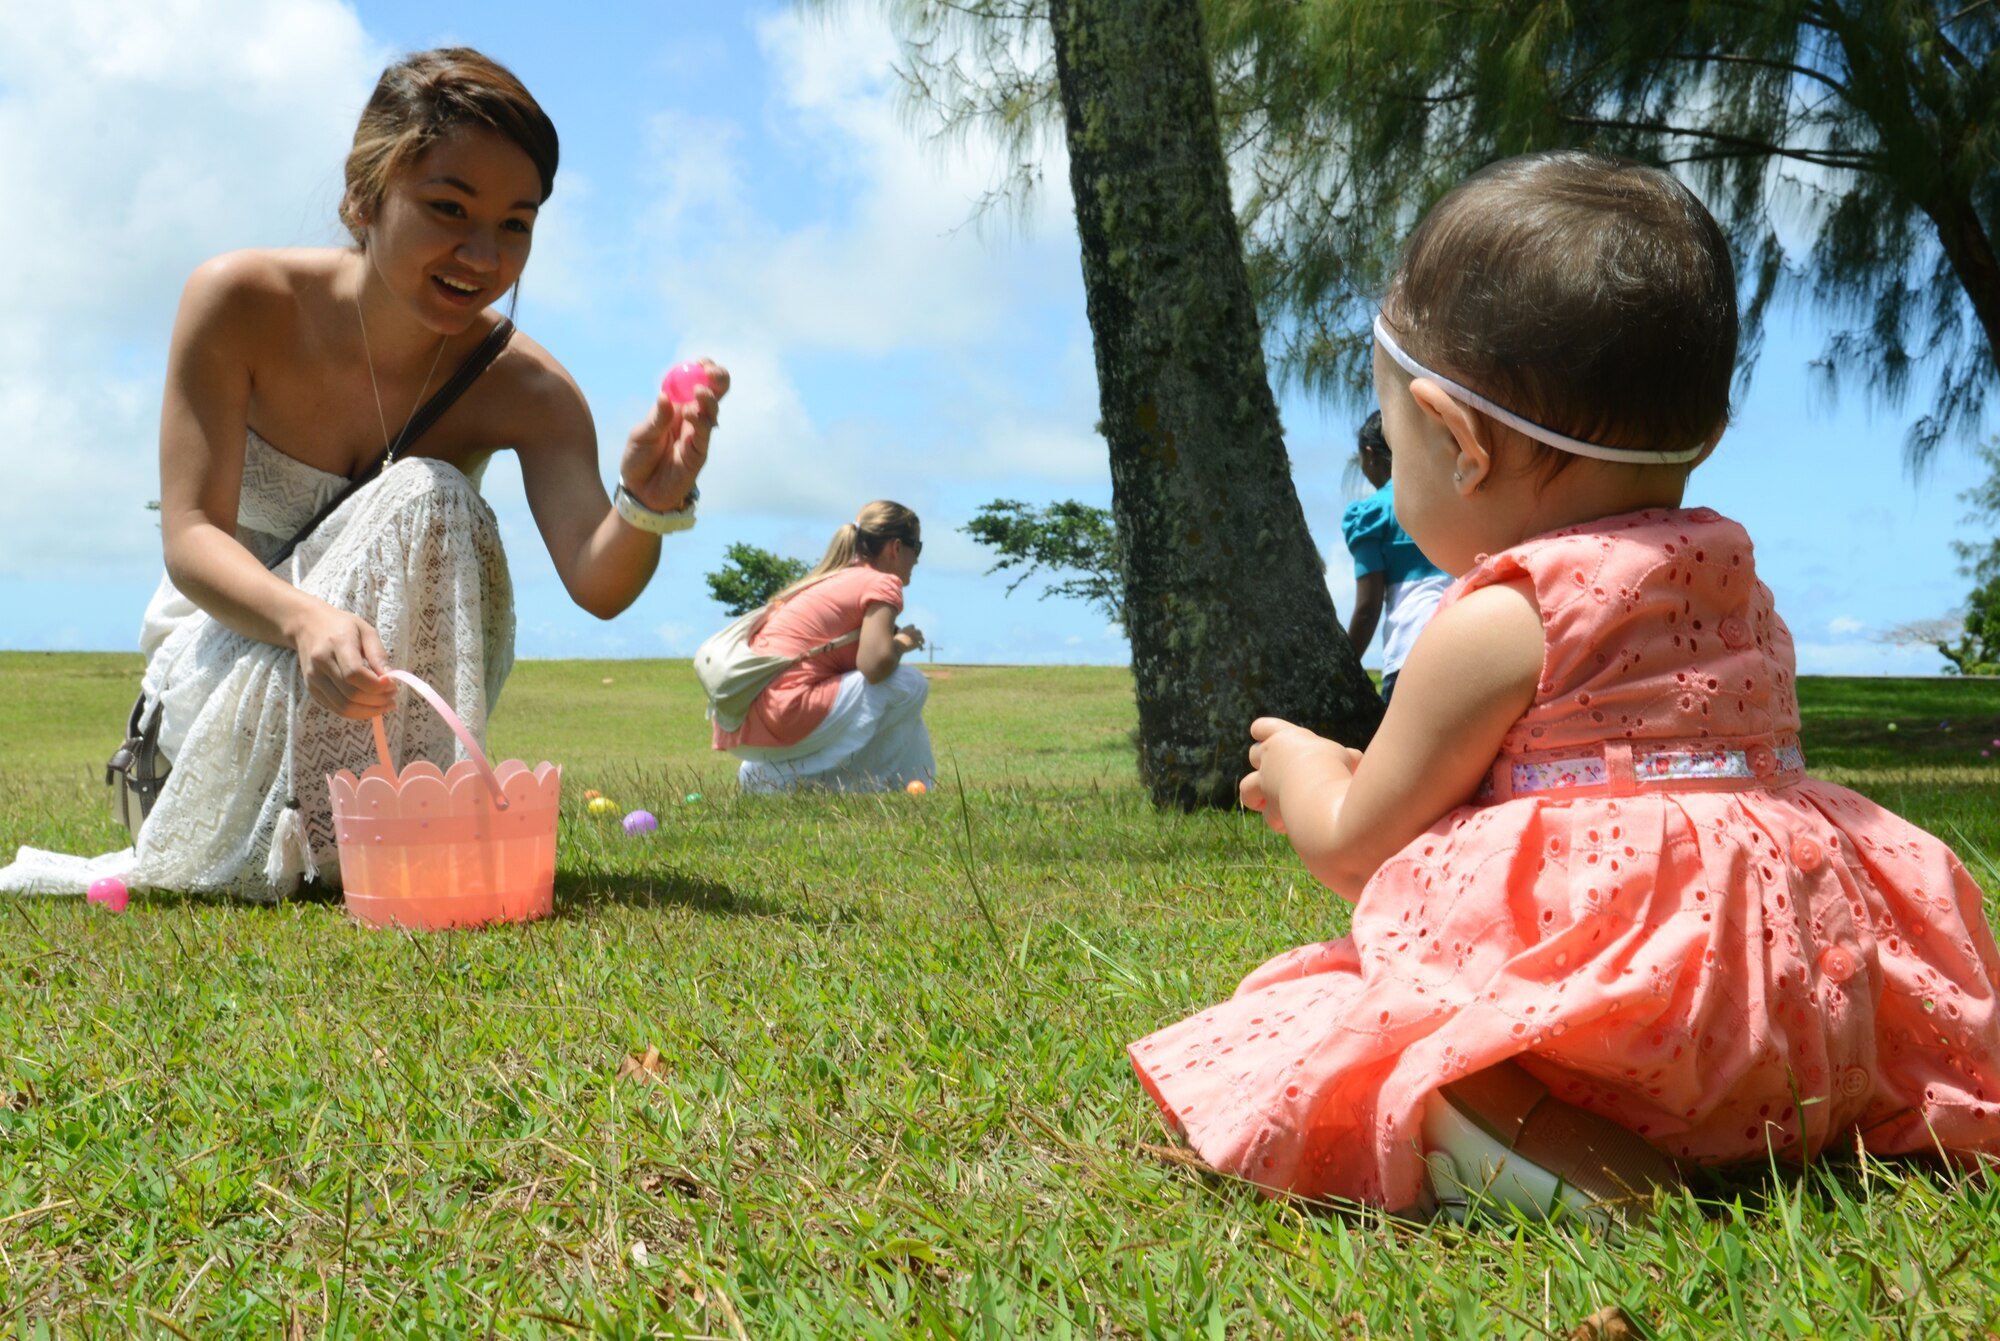 Brianna Lujan helps her daughter gather plastic eggs during the 554th RED HORSE Squadron Egg-stravaganza on Andersen Air Force, Guam, March 23, 2013. The squadron function was a combined information fair, potluck lunch and children’s Easter egg hunt planned by the unit’s spouses to help families of deployed military members celebrate the season and expose them to many of the base’s support programs. (U.S. Air Force photo by Senior Airman Benjamin Wiseman/Released)